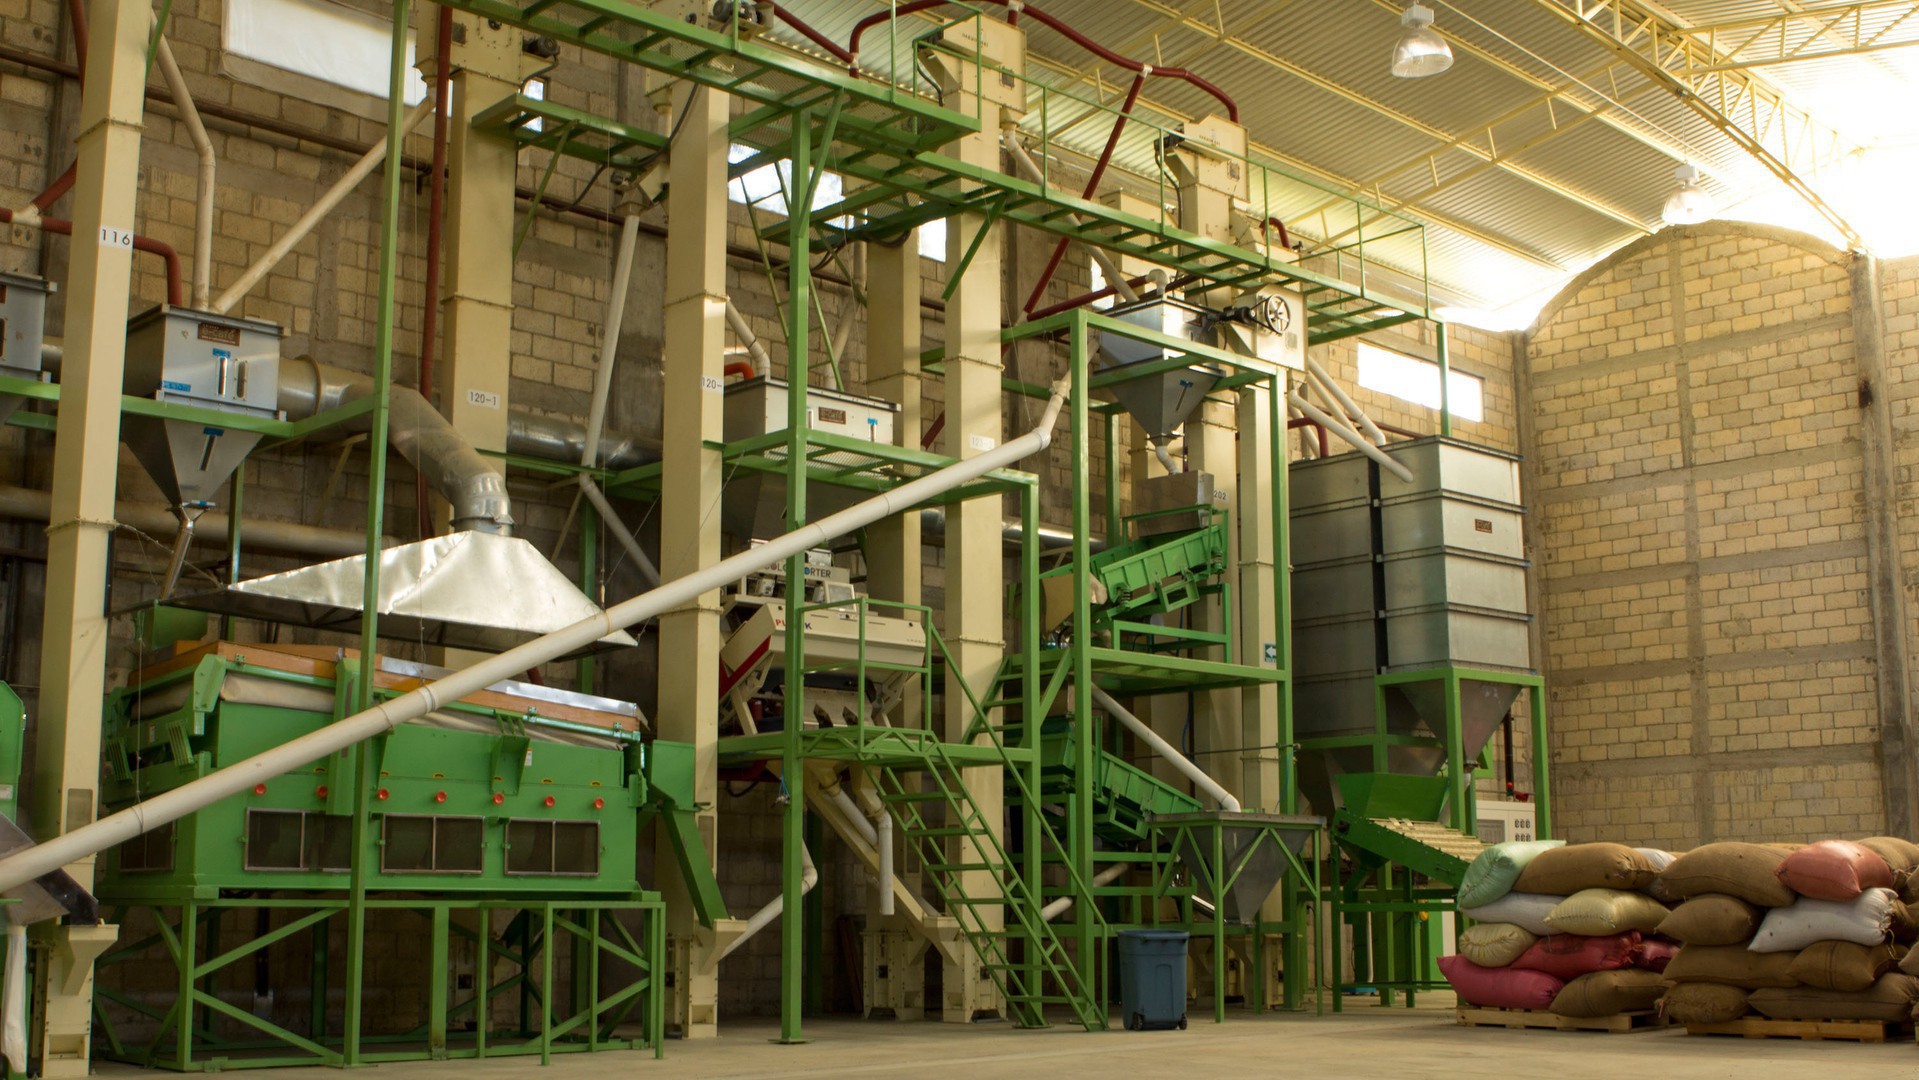 Coffee production machinery sits in the warehouse of E-Café. (Photo by Alex Lancial.)